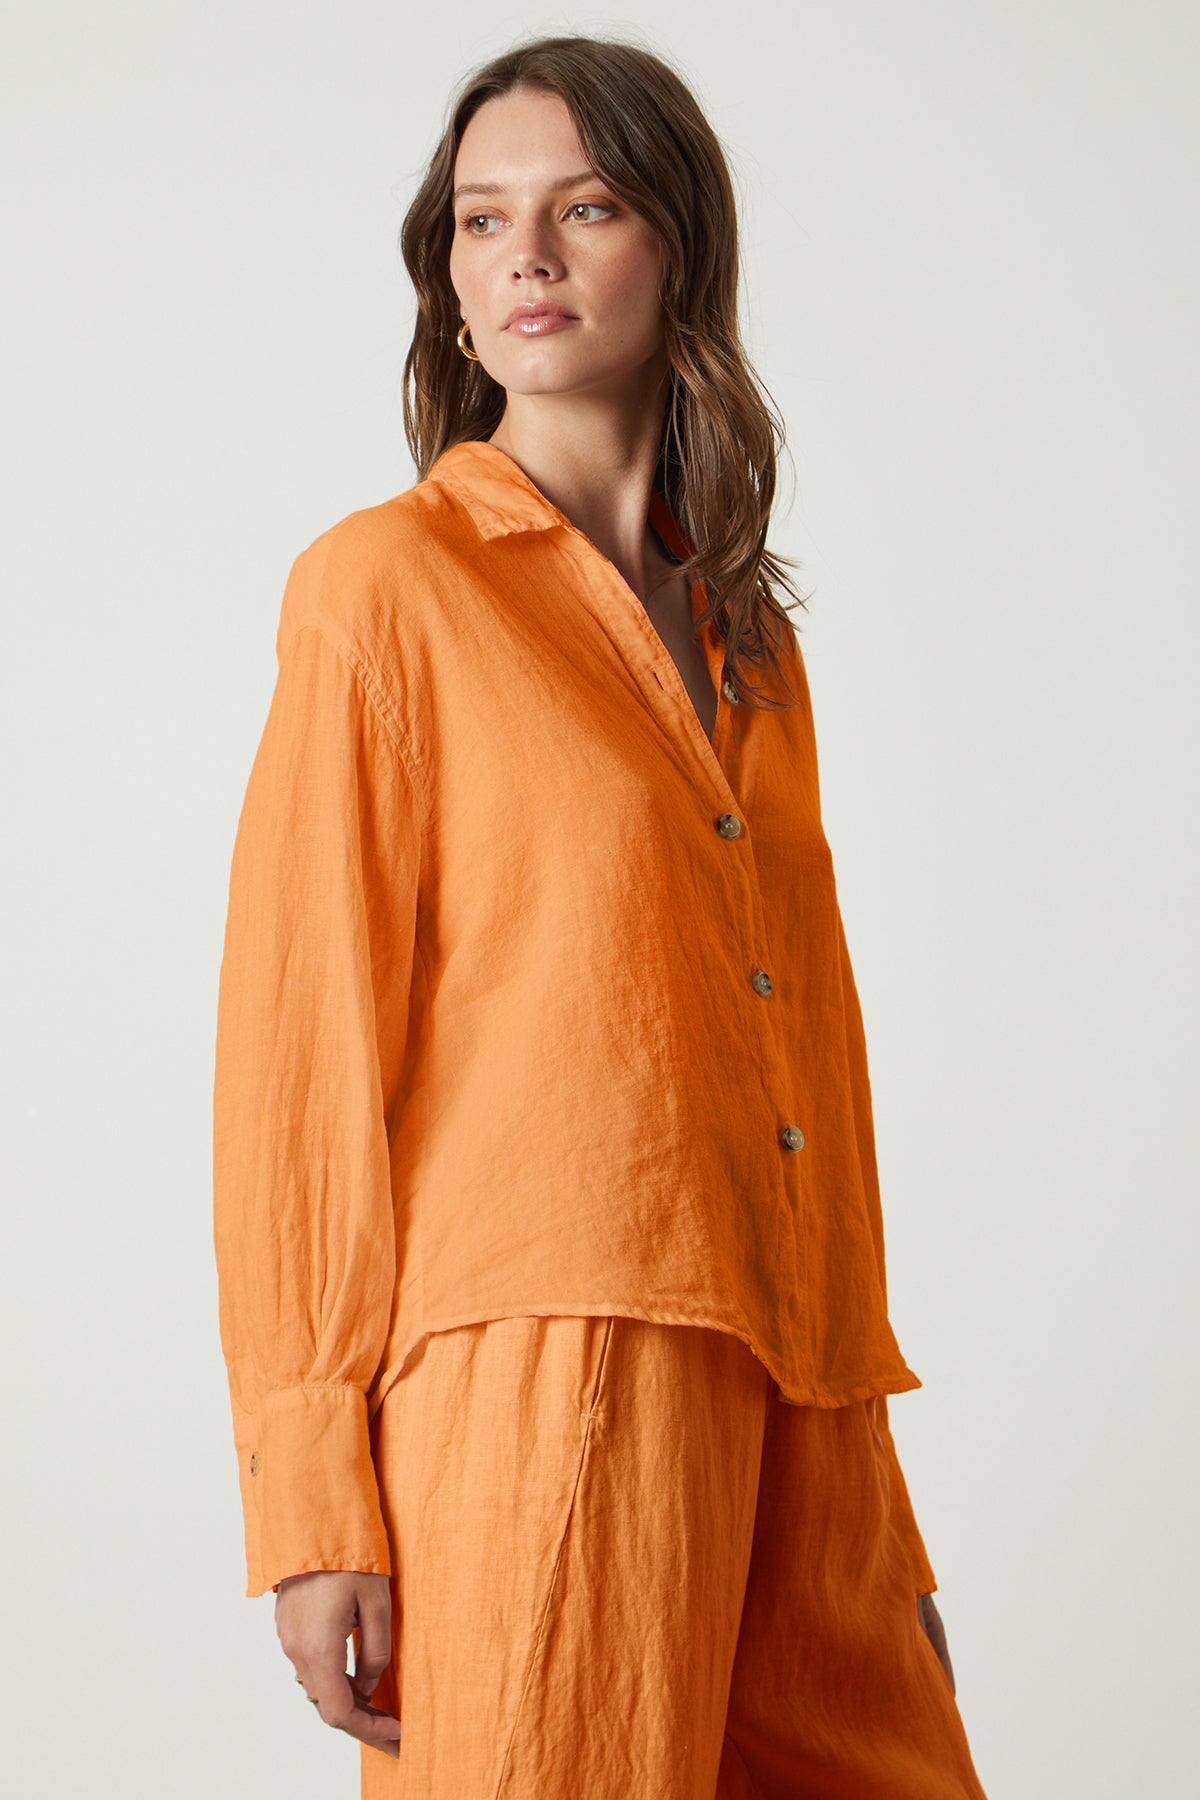 Eden button up shirt in orange heat with Lola pant front & side-26094866038977